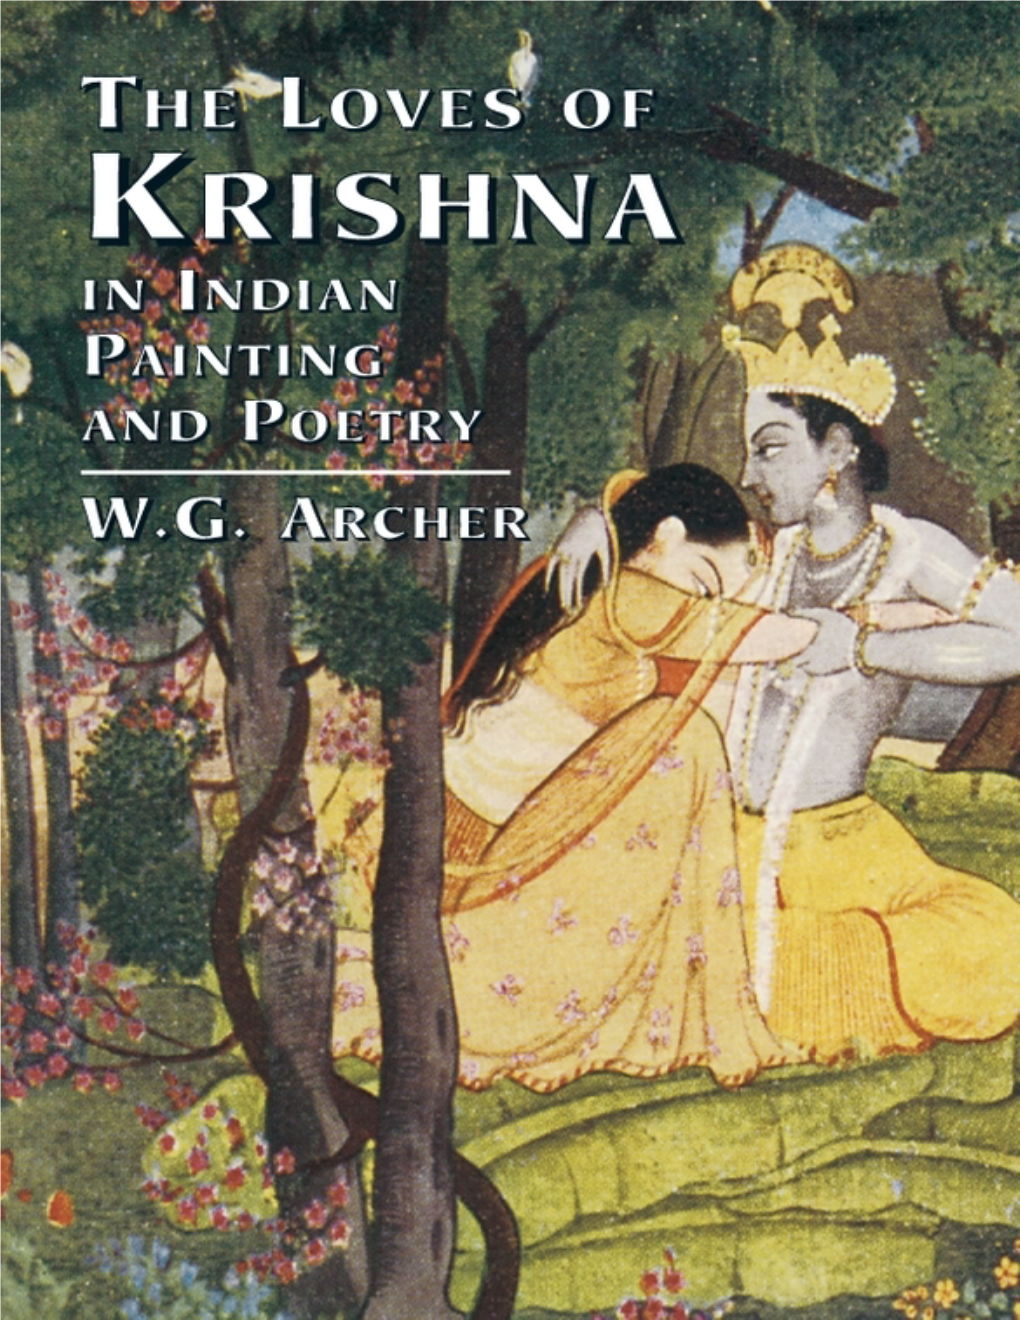 The Loves of Krishna in Indian Painting and Poetry / W.G